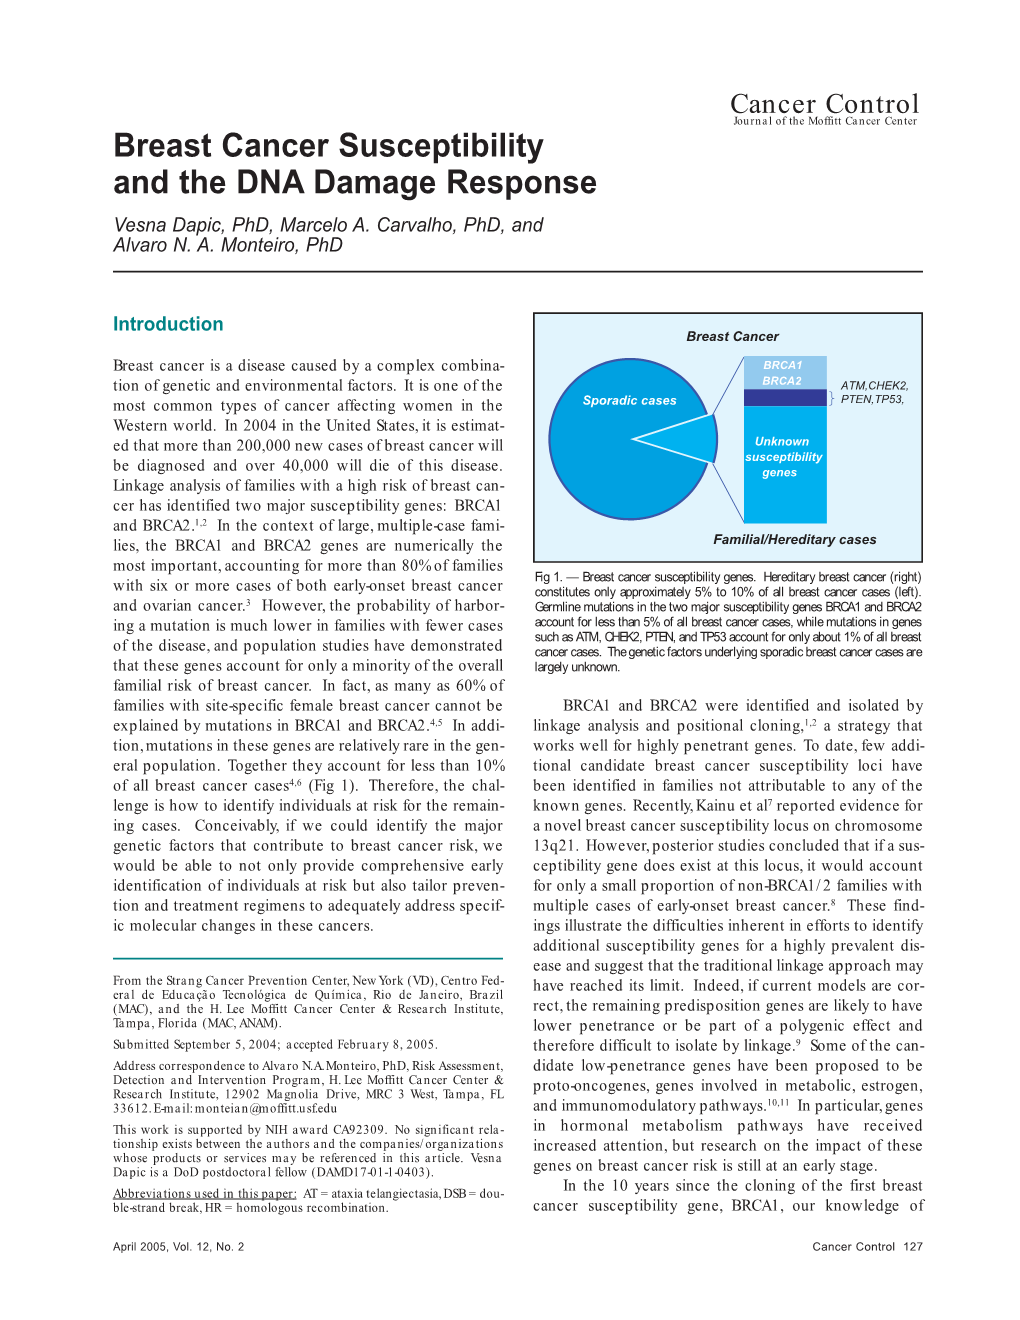 Breast Cancer Susceptibility and the DNA Damage Response Vesna Dapic, Phd, Marcelo A